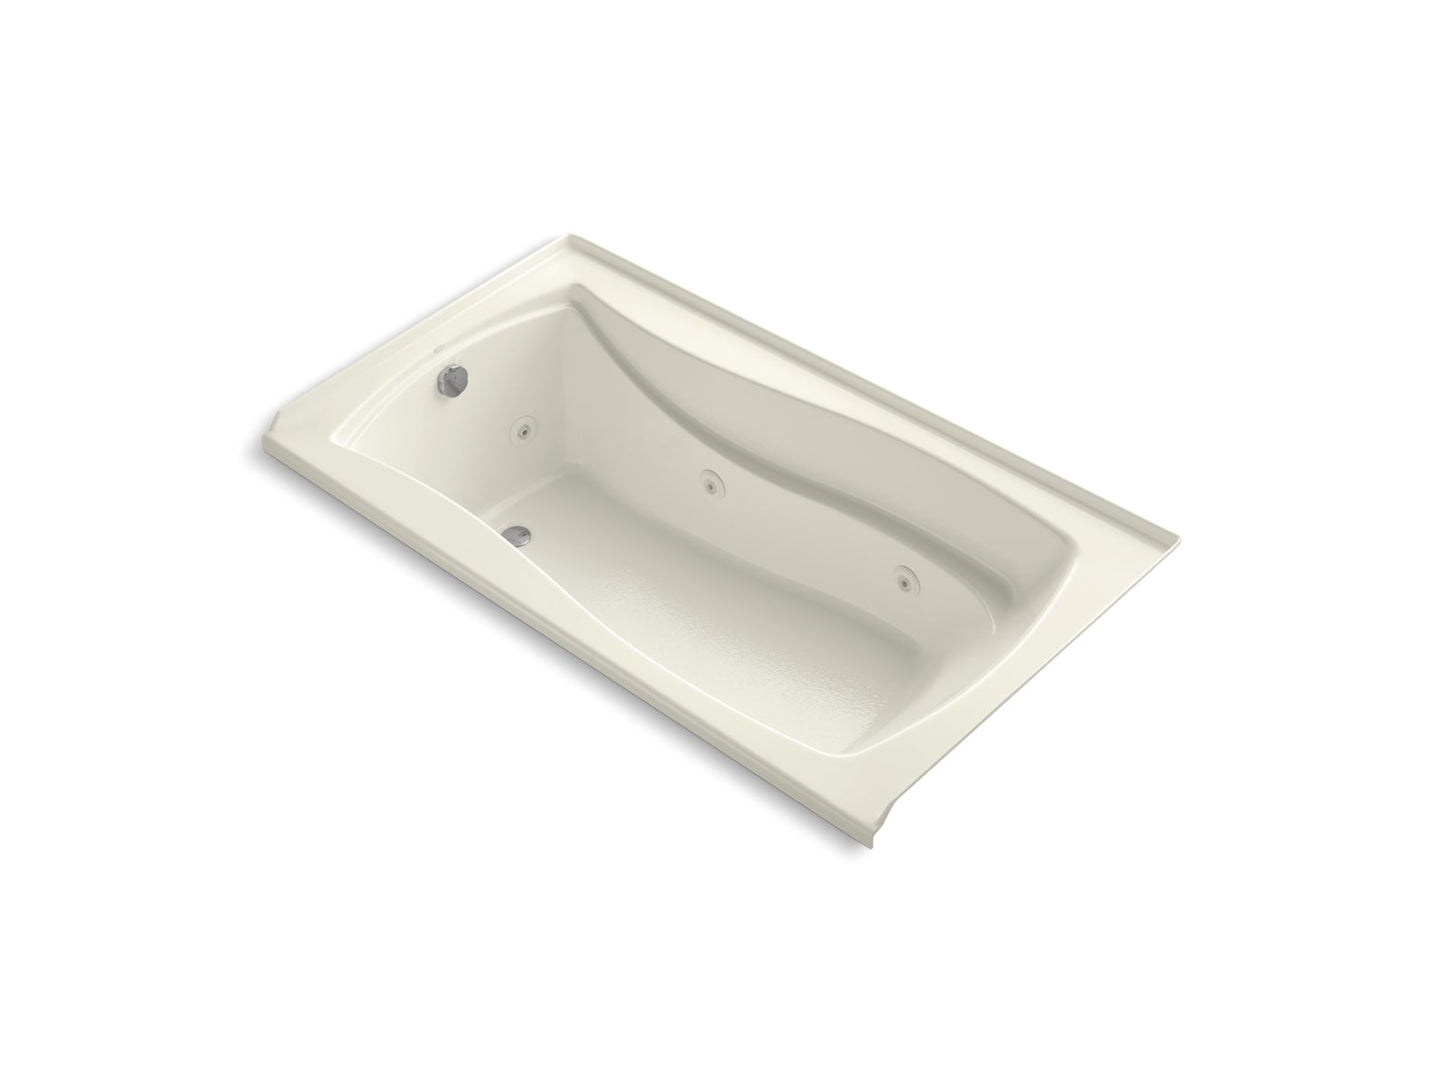 KOHLER K-1224-LW-96 Mariposa 66" X 36" Alcove Whirlpool Bath With Bask Heated Surface, Left Drain In Biscuit